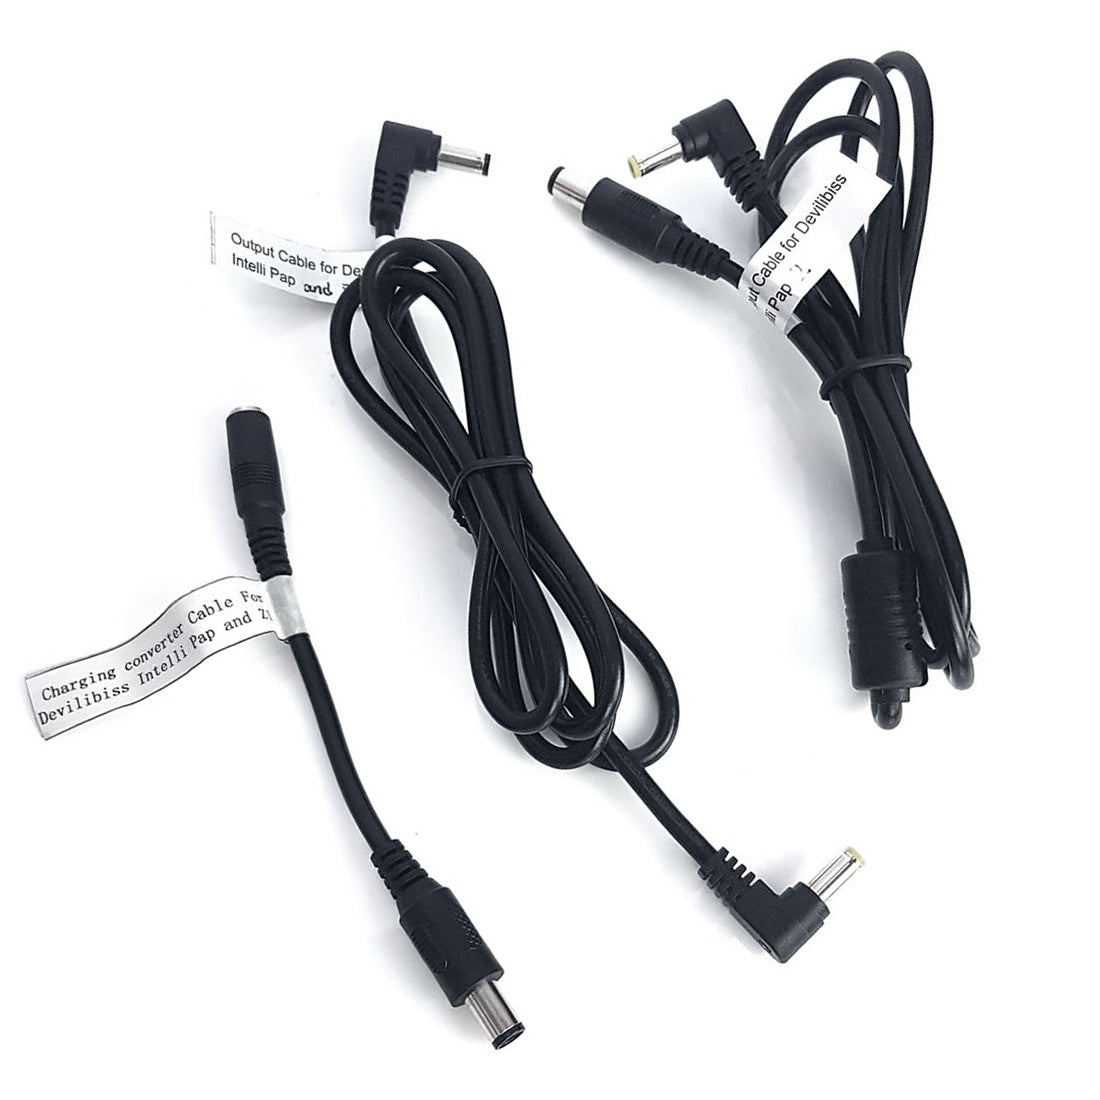 IntelliPAP, Z2 & Z1 Adapter Cables for Pilot 12 Lite CPAP Battery Packs